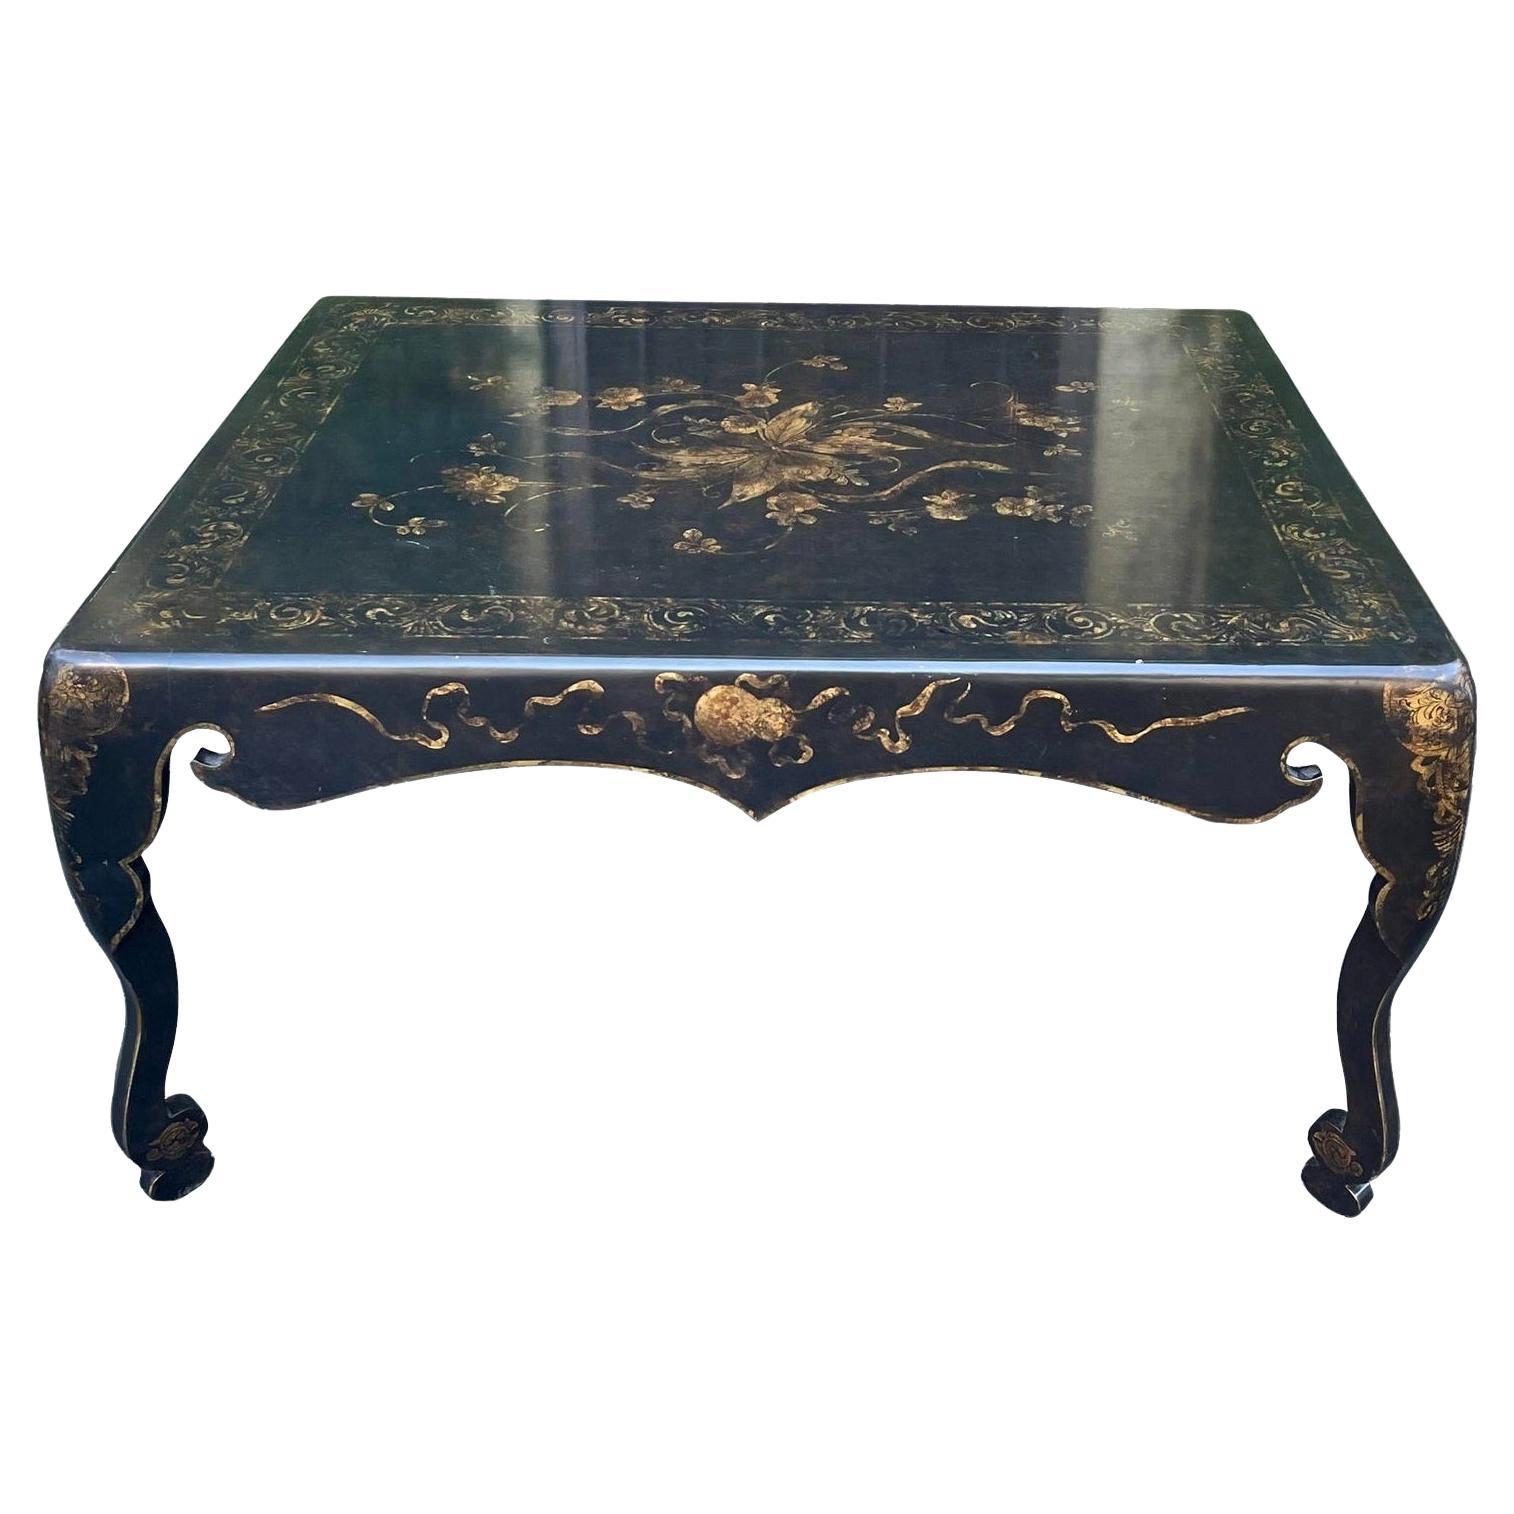 Black & Gold Chinoiserie Cocktail Coffee Cocktail or Tea Table